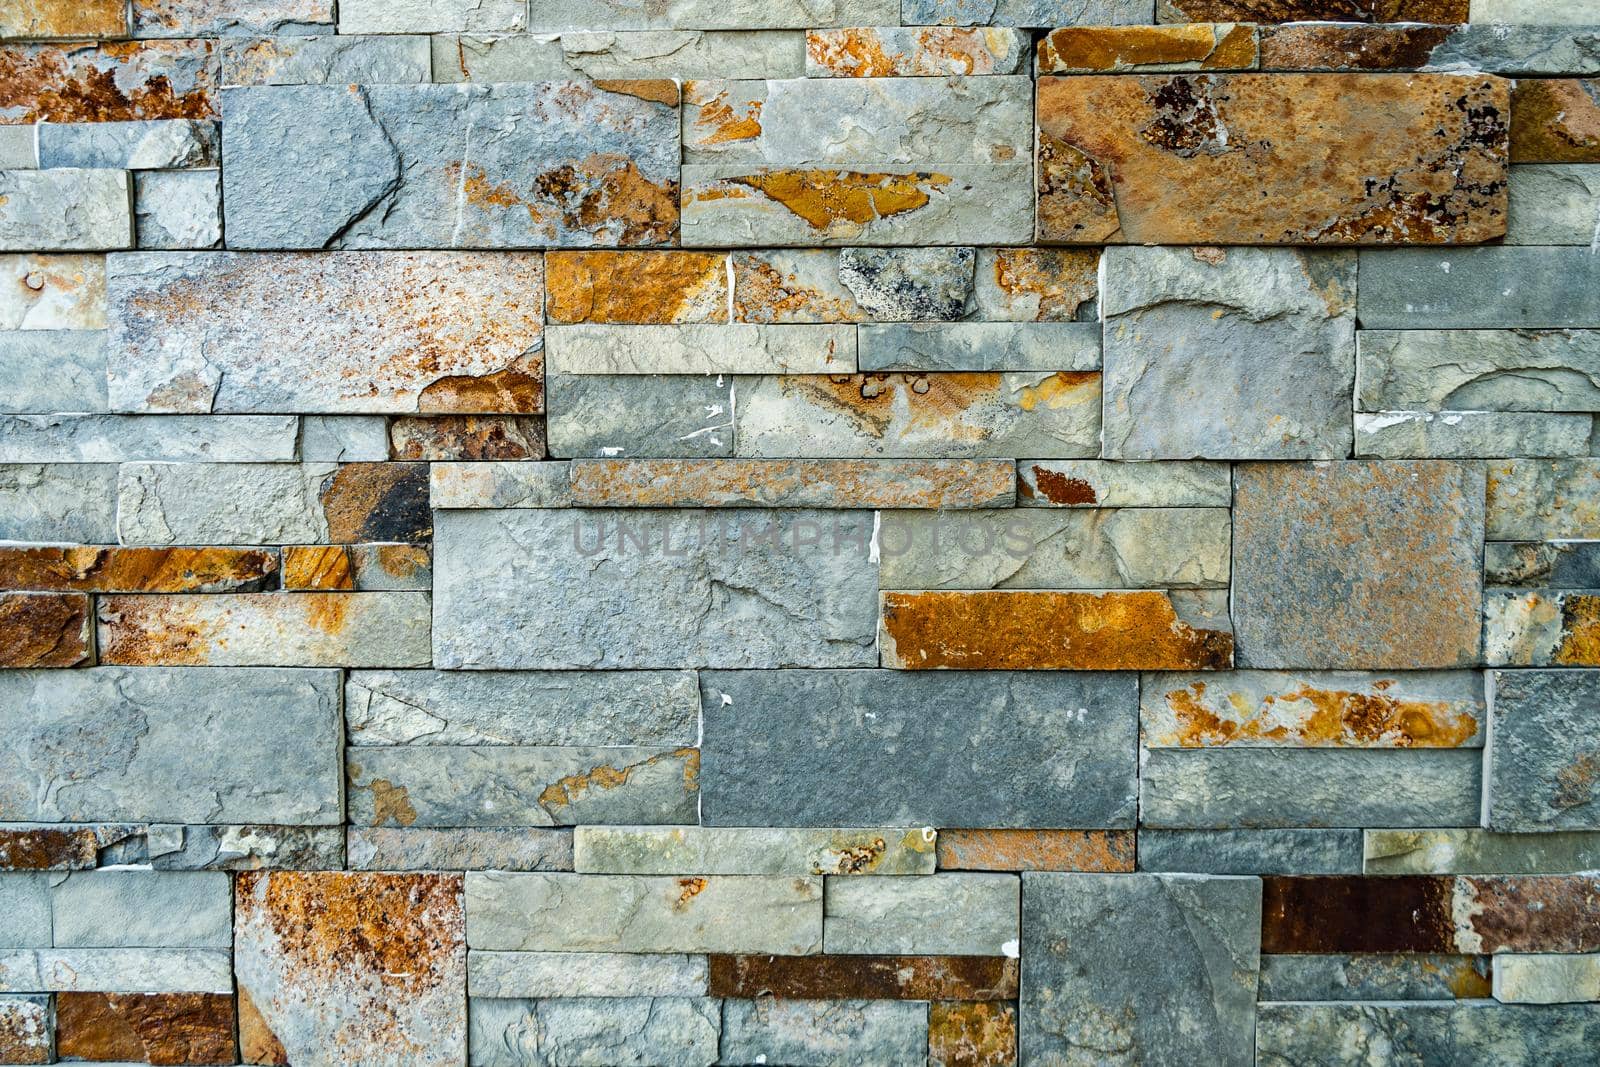 Background arrangement of stones or slabs of different shapes and colors on a wall. by hdcaputo